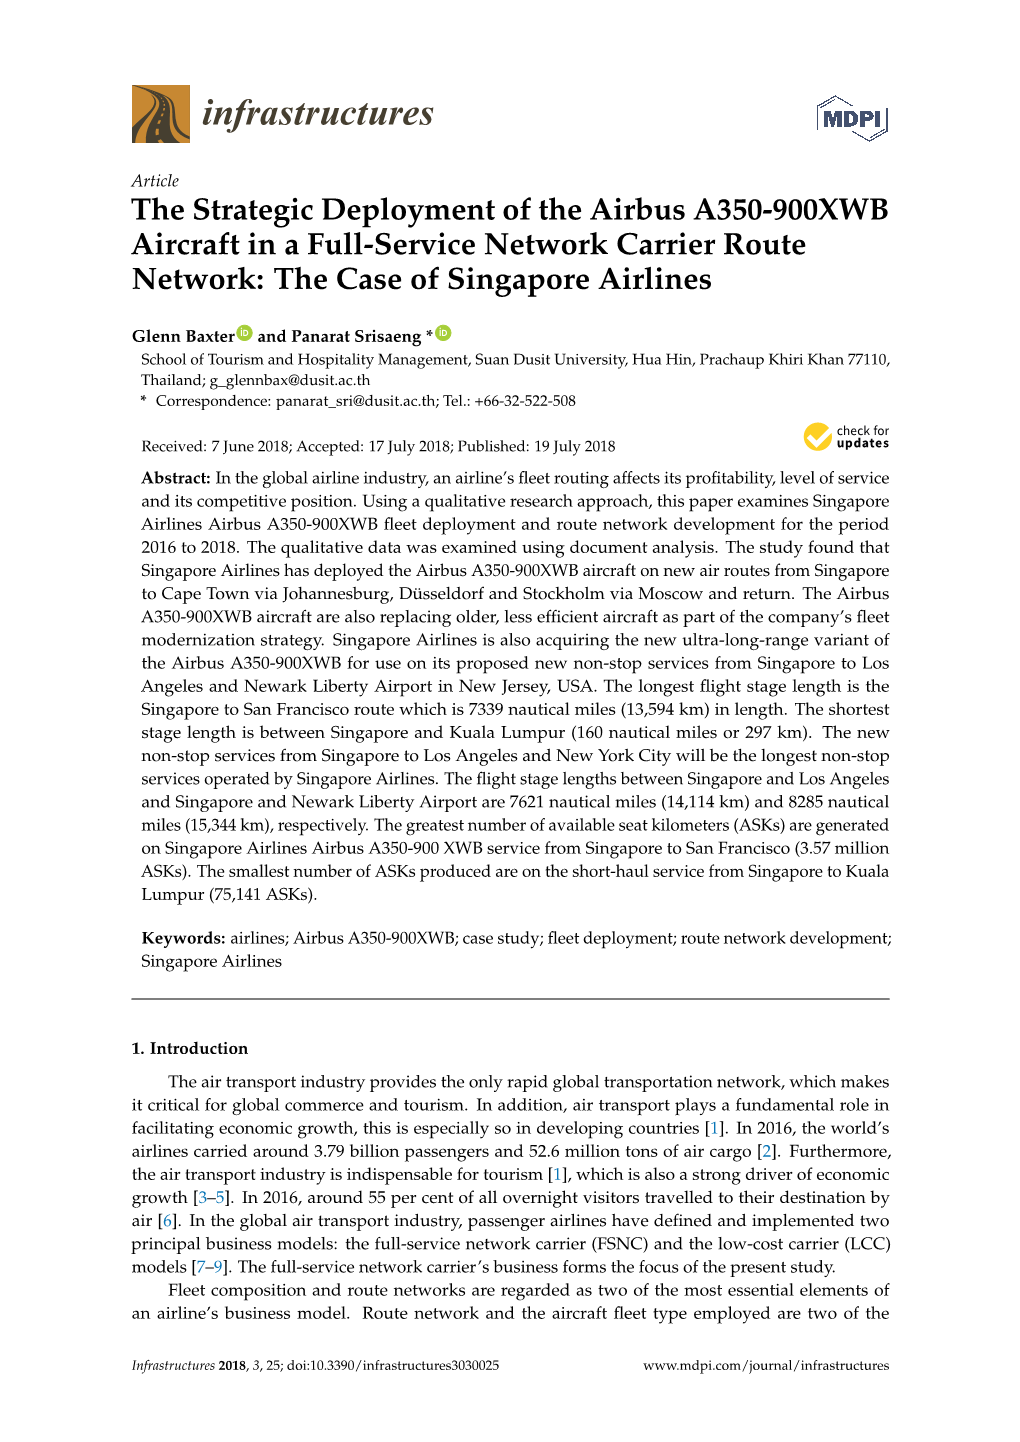 The Strategic Deployment of the Airbus A350-900XWB Aircraft in a Full-Service Network Carrier Route Network: the Case of Singapore Airlines